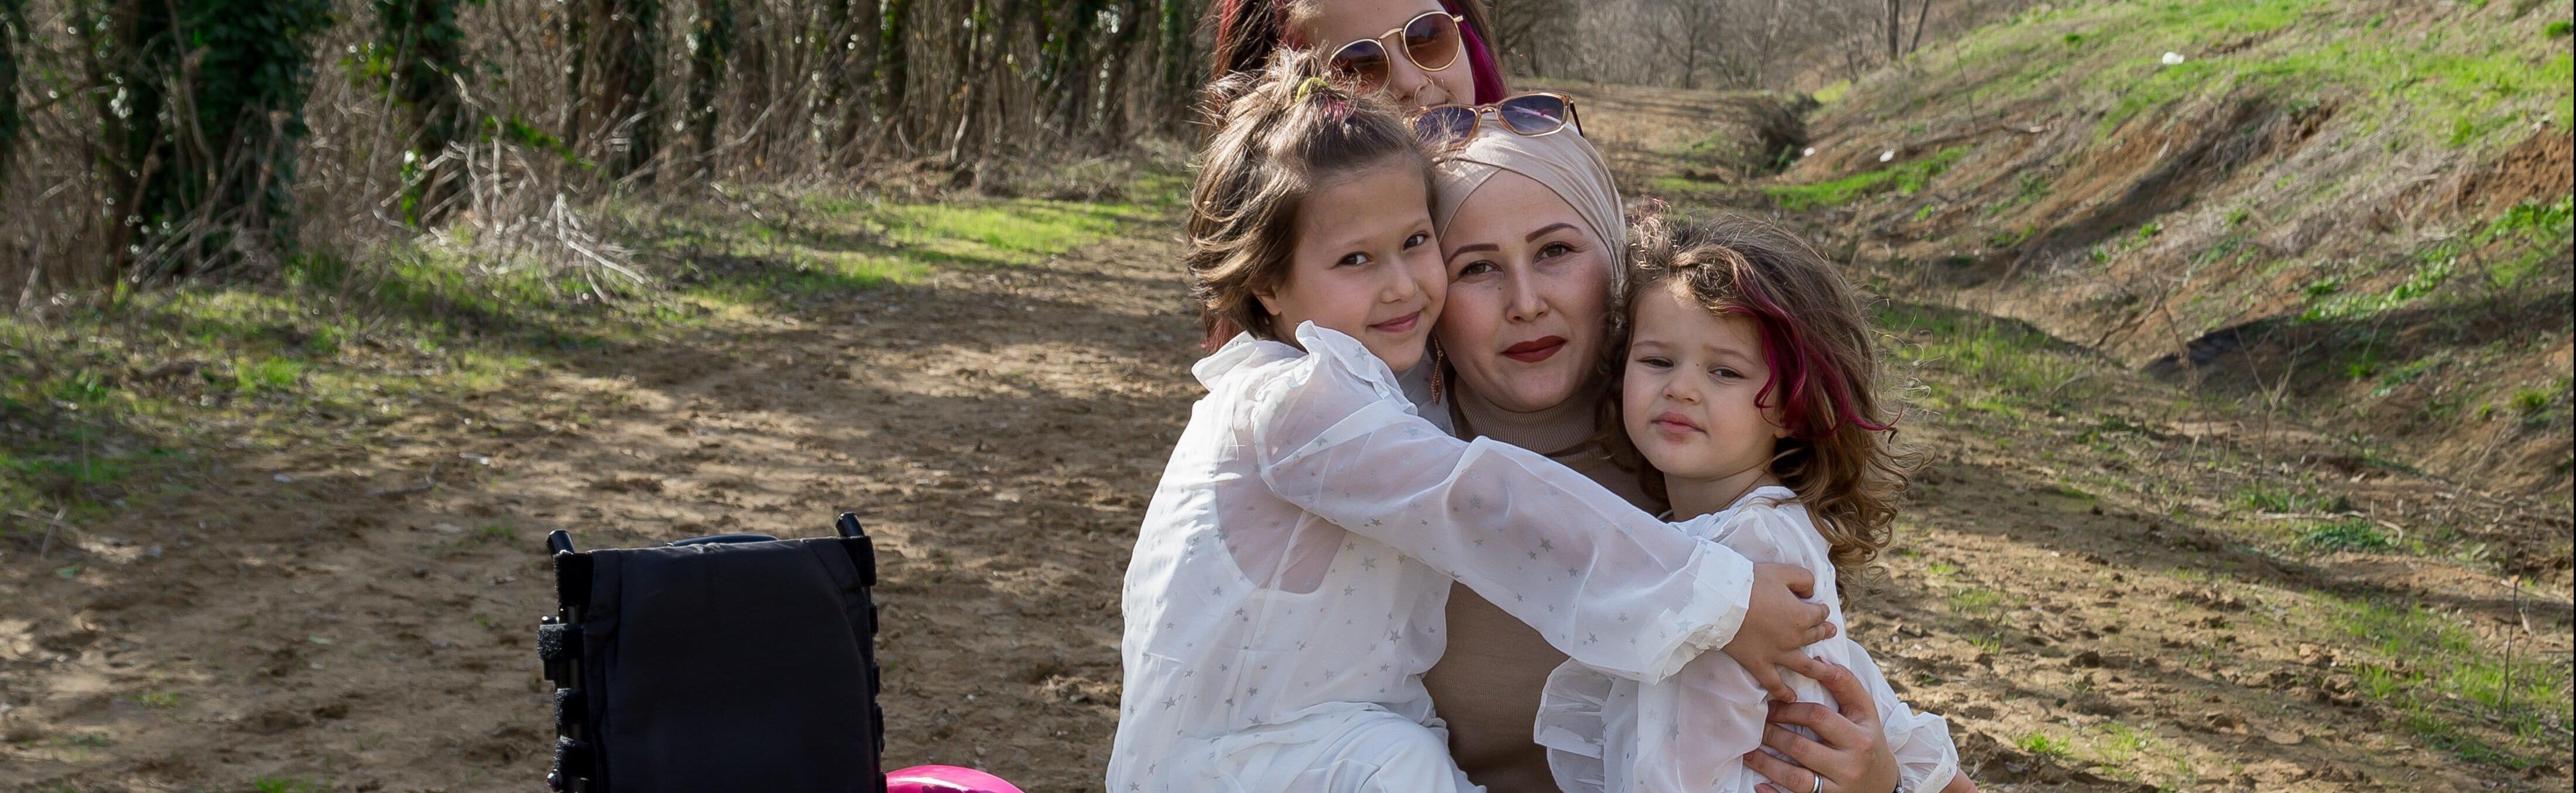 A mother being embraced by her three daughters all wearing white, squatting next to a pink wheelchair outdoors